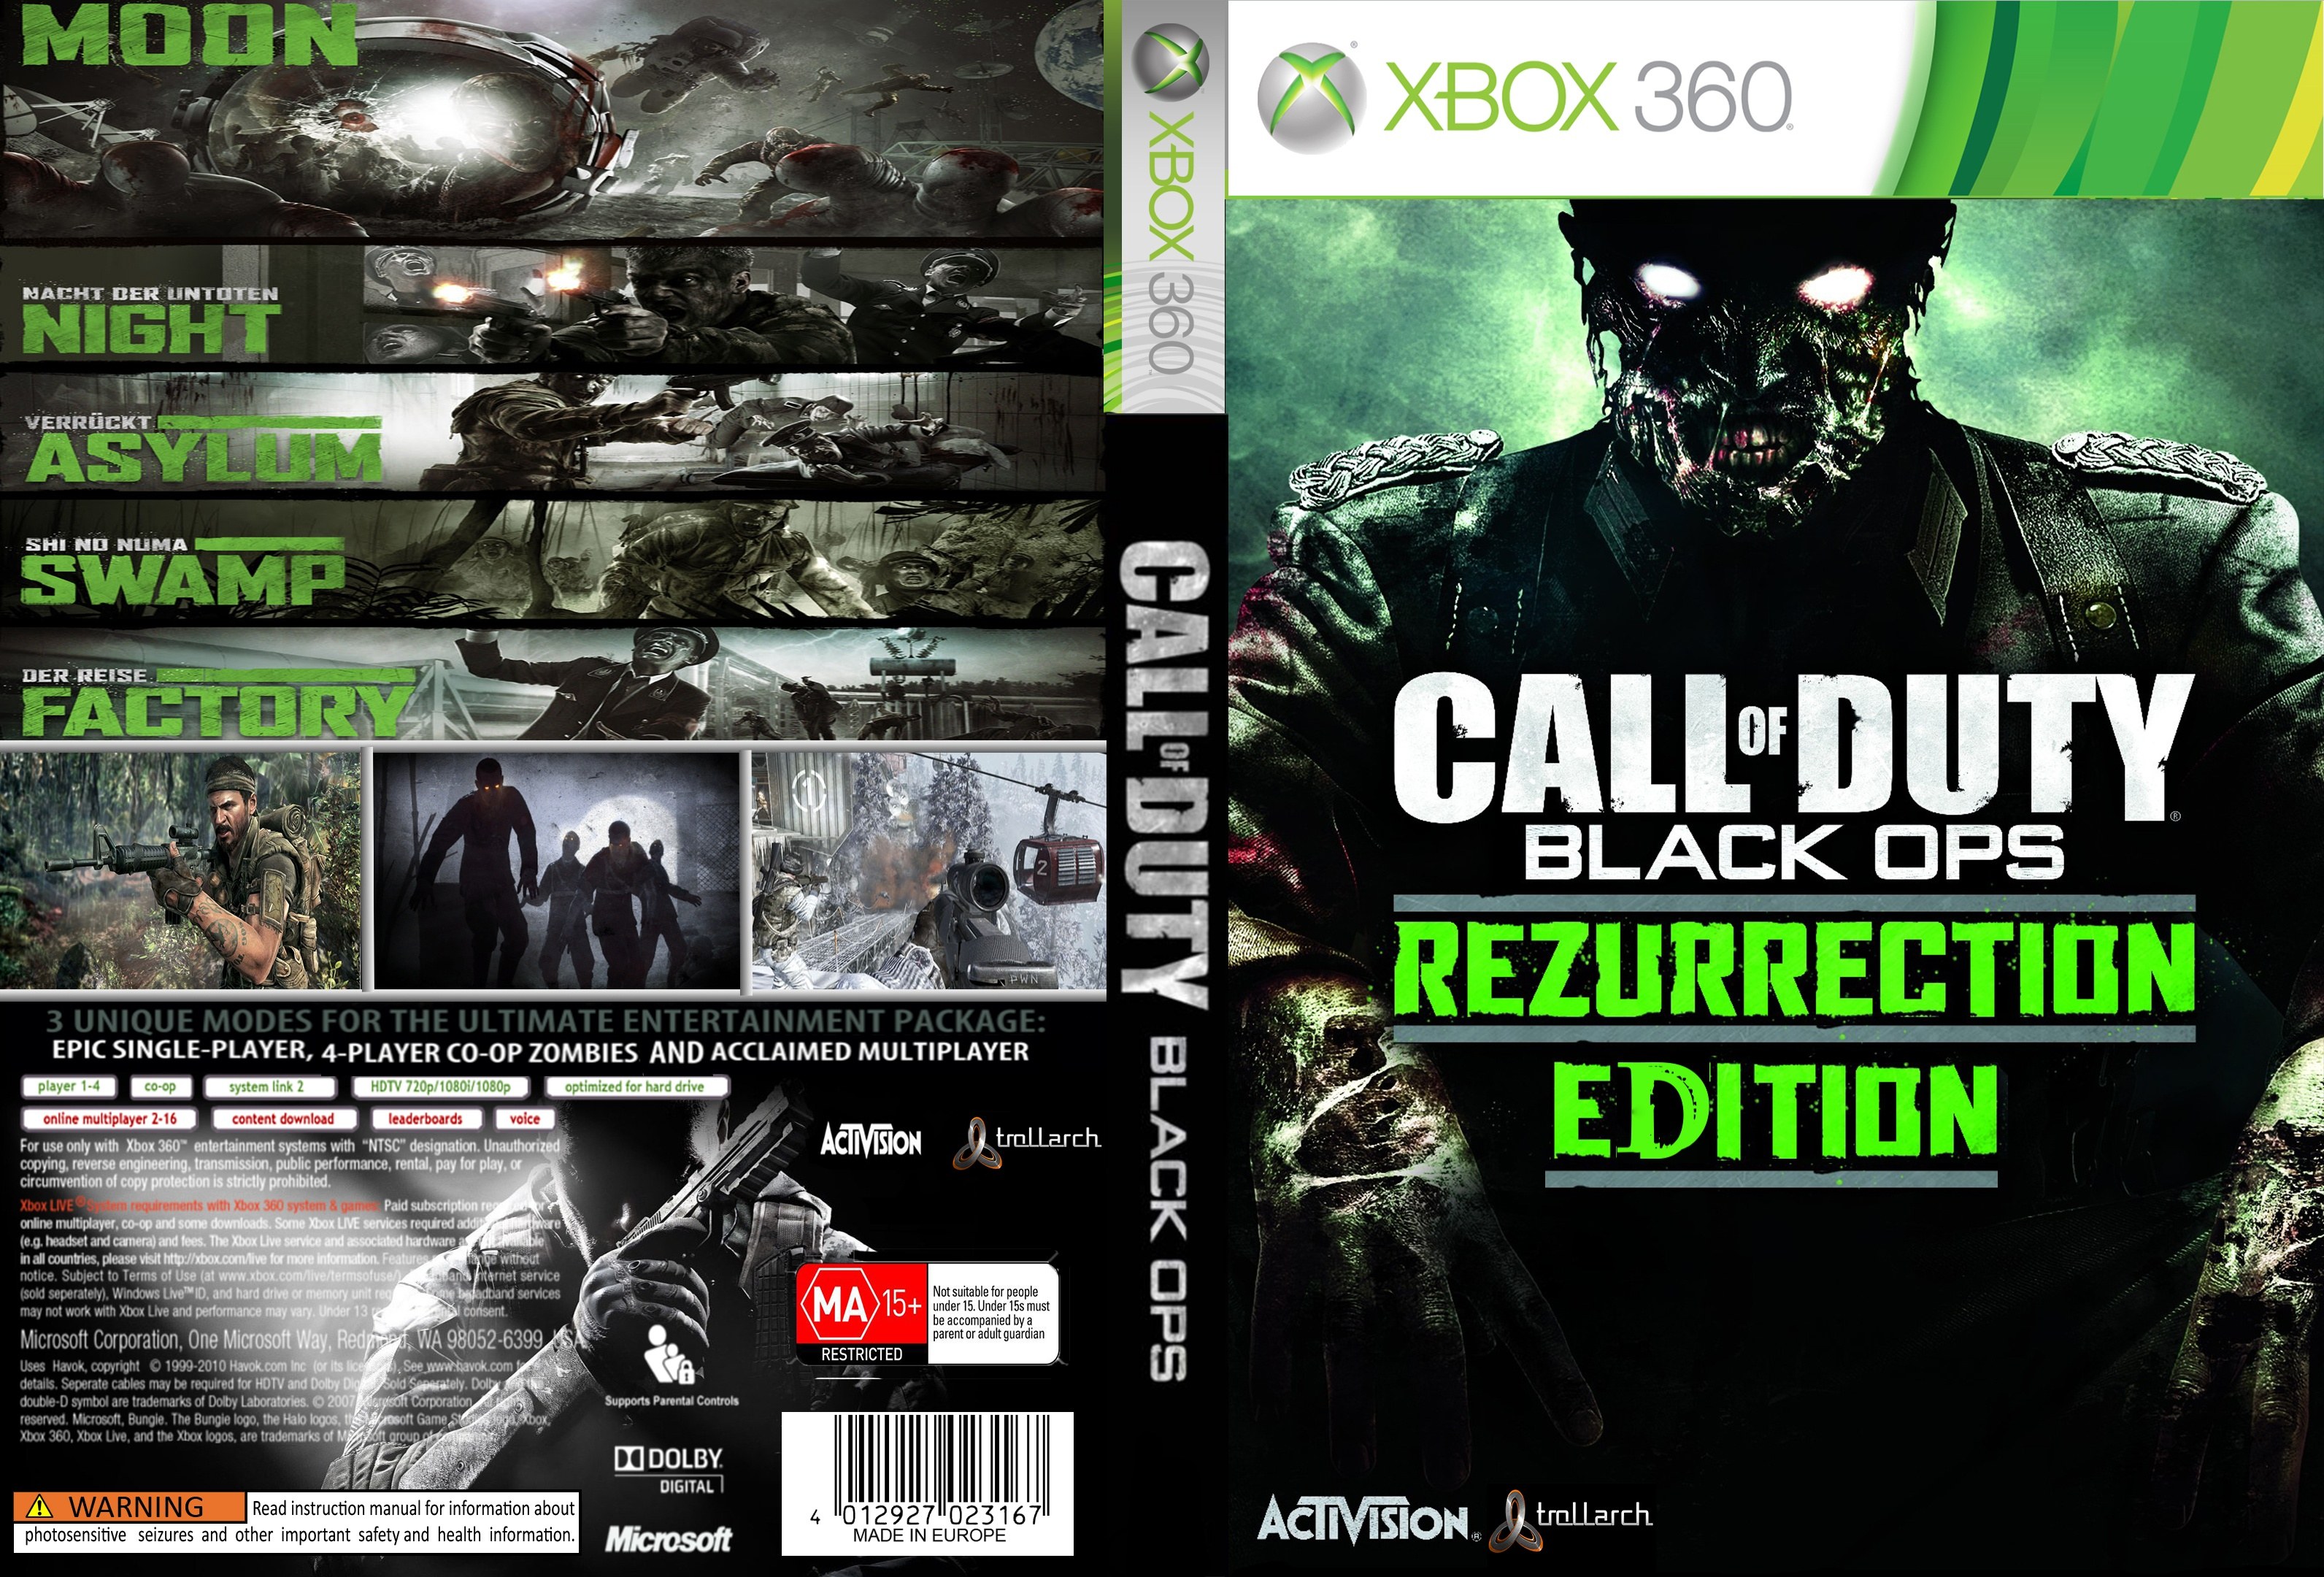 Xbox games download. Cod Black ops 2 обложка Xbox 360. Black ops Xbox 360. Call of Duty на иксбокс 360. Xbox 360 Cod Black ops 1.